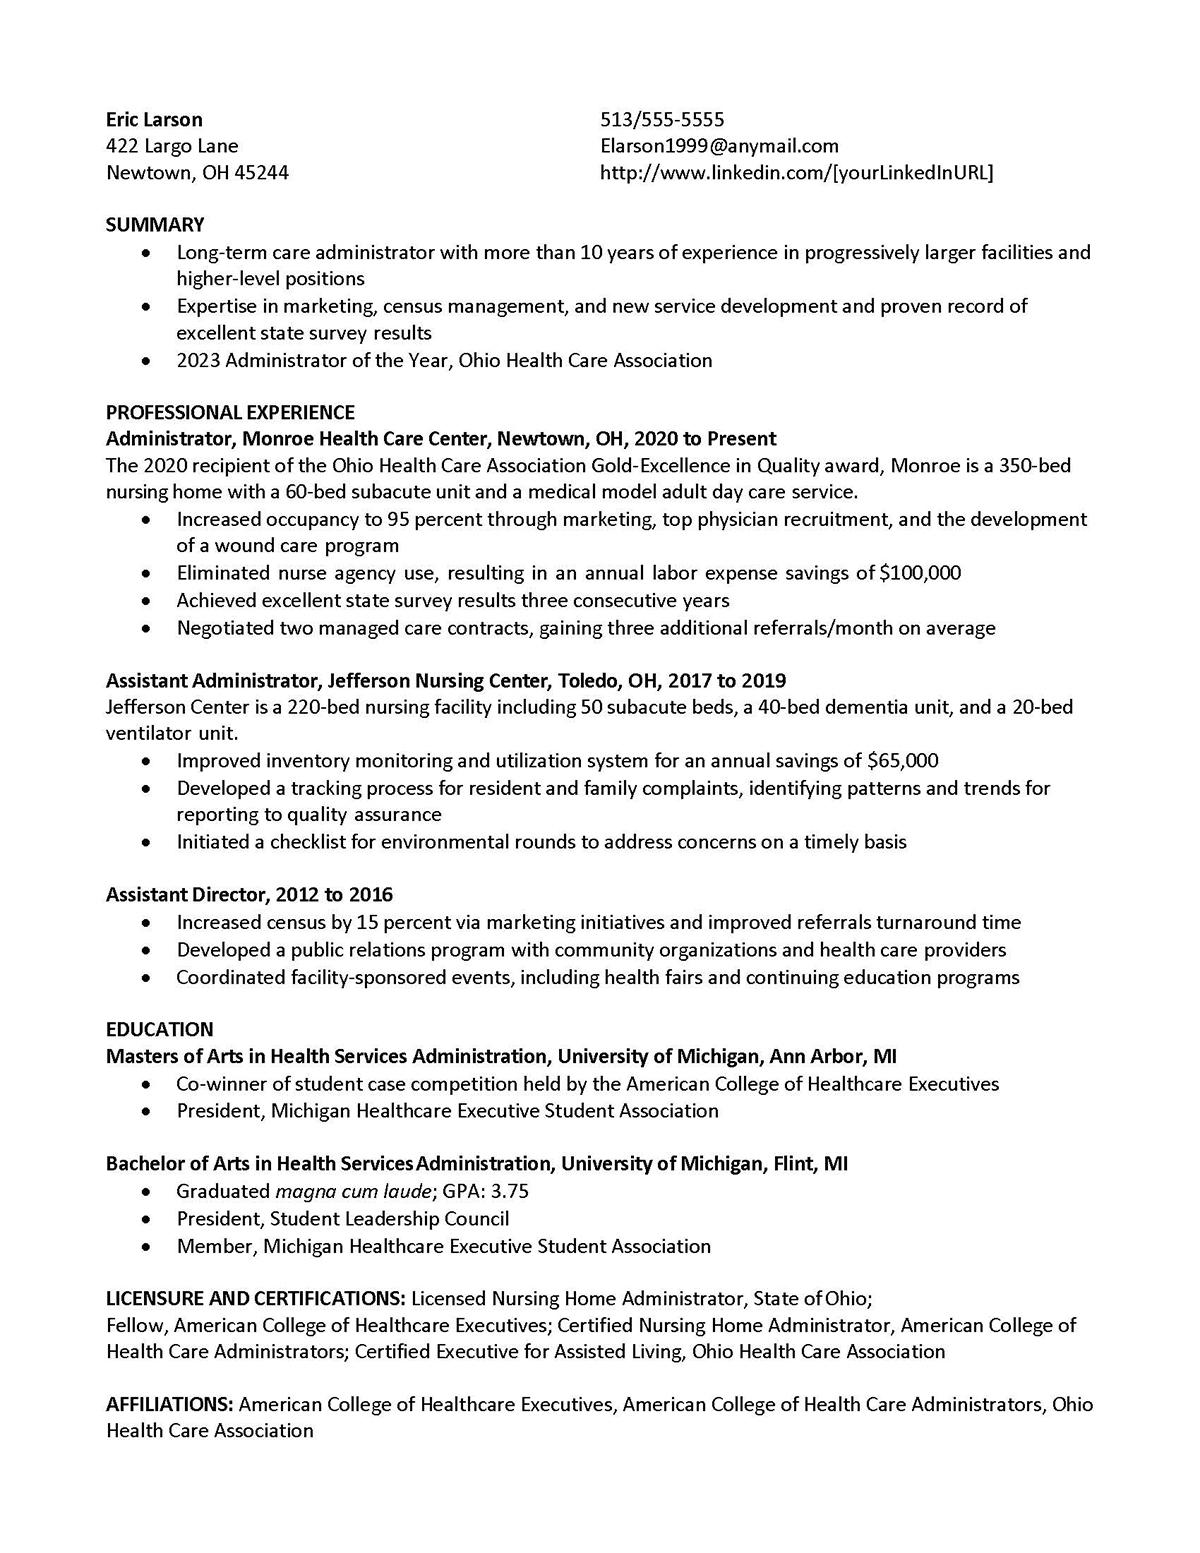 Sample resume: Health Care Management, High Experience, Combination